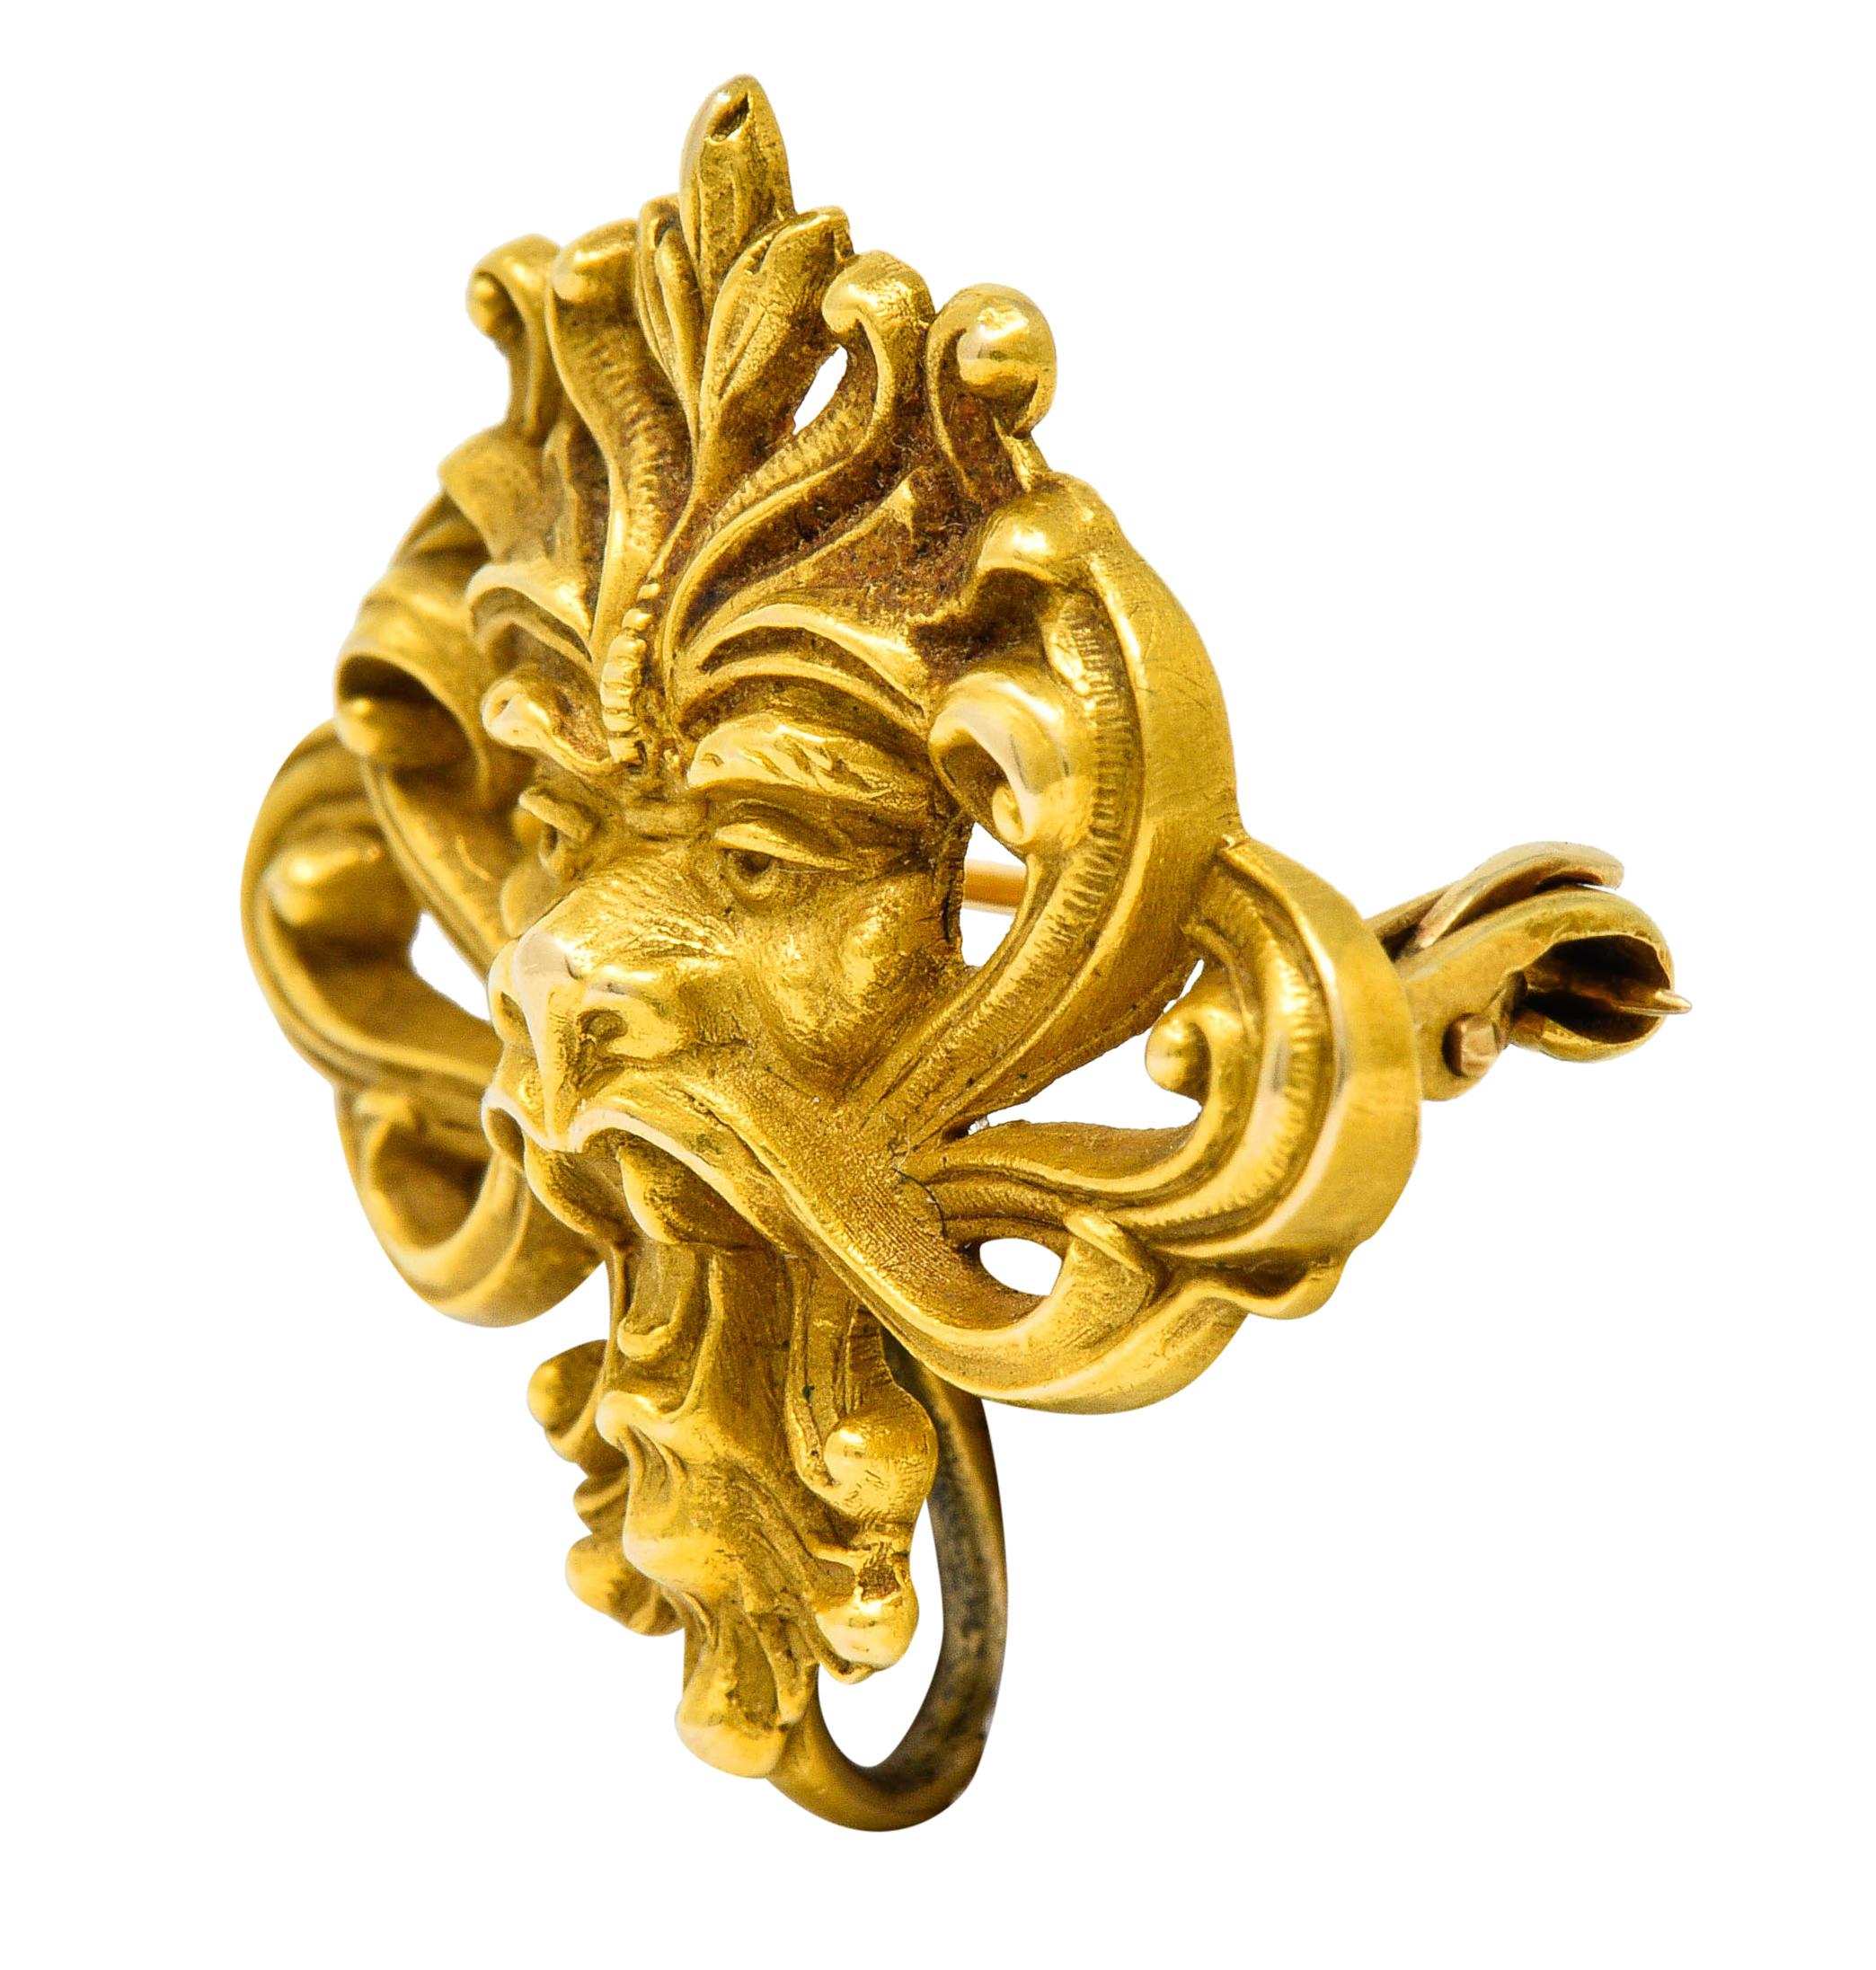 Brooch is designed as a Green man style roaring lion

With stylized whiplash and foliate as its mane

Completed by a pin stem with locking closure and a watch hook

Tested as 14 karat gold

Circa: 1905

Measures: 1 x 1 1/8 inches

Total weight: 3.9